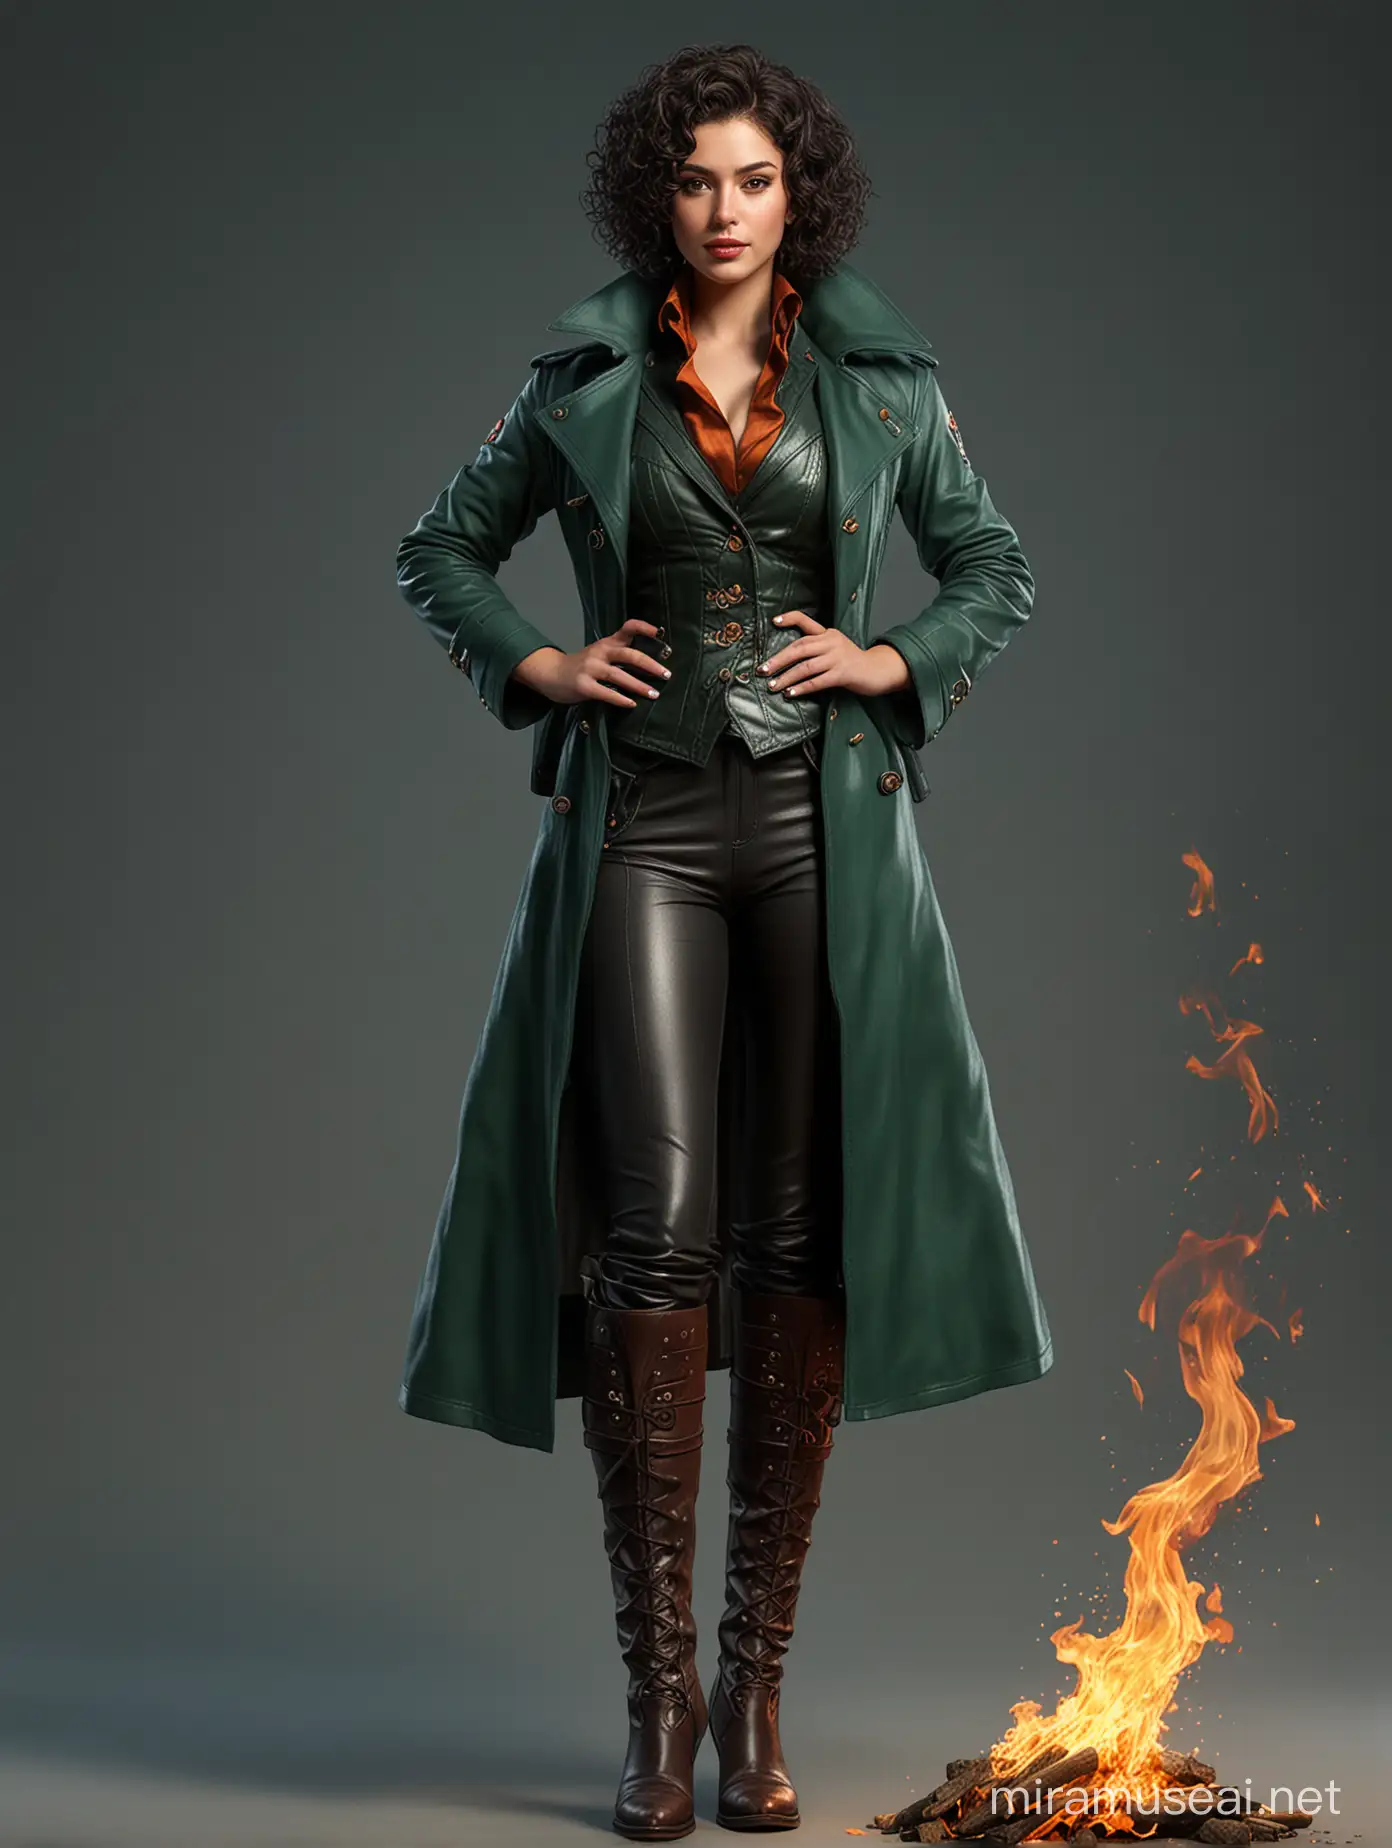 photorealistic very detailled full-body picture of a beautiful female fire elementalist with short black curly hair, brown eyes, big lips wearing high leather boots and a dark green coat